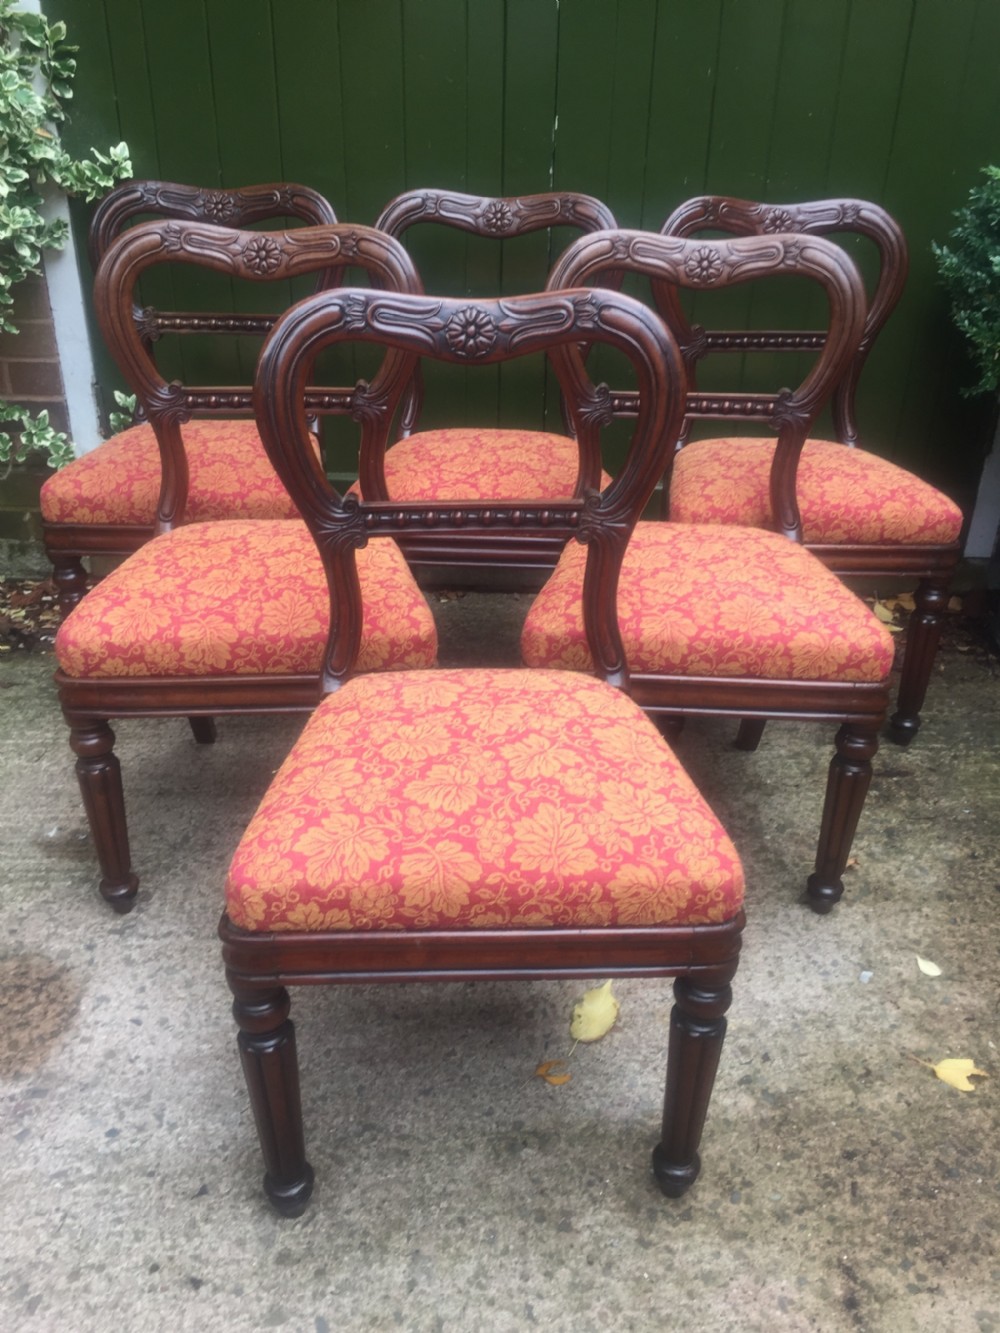 high quality set of 6 early c19th george iv period mahogany dining chairs attributed to gillows of lancaster